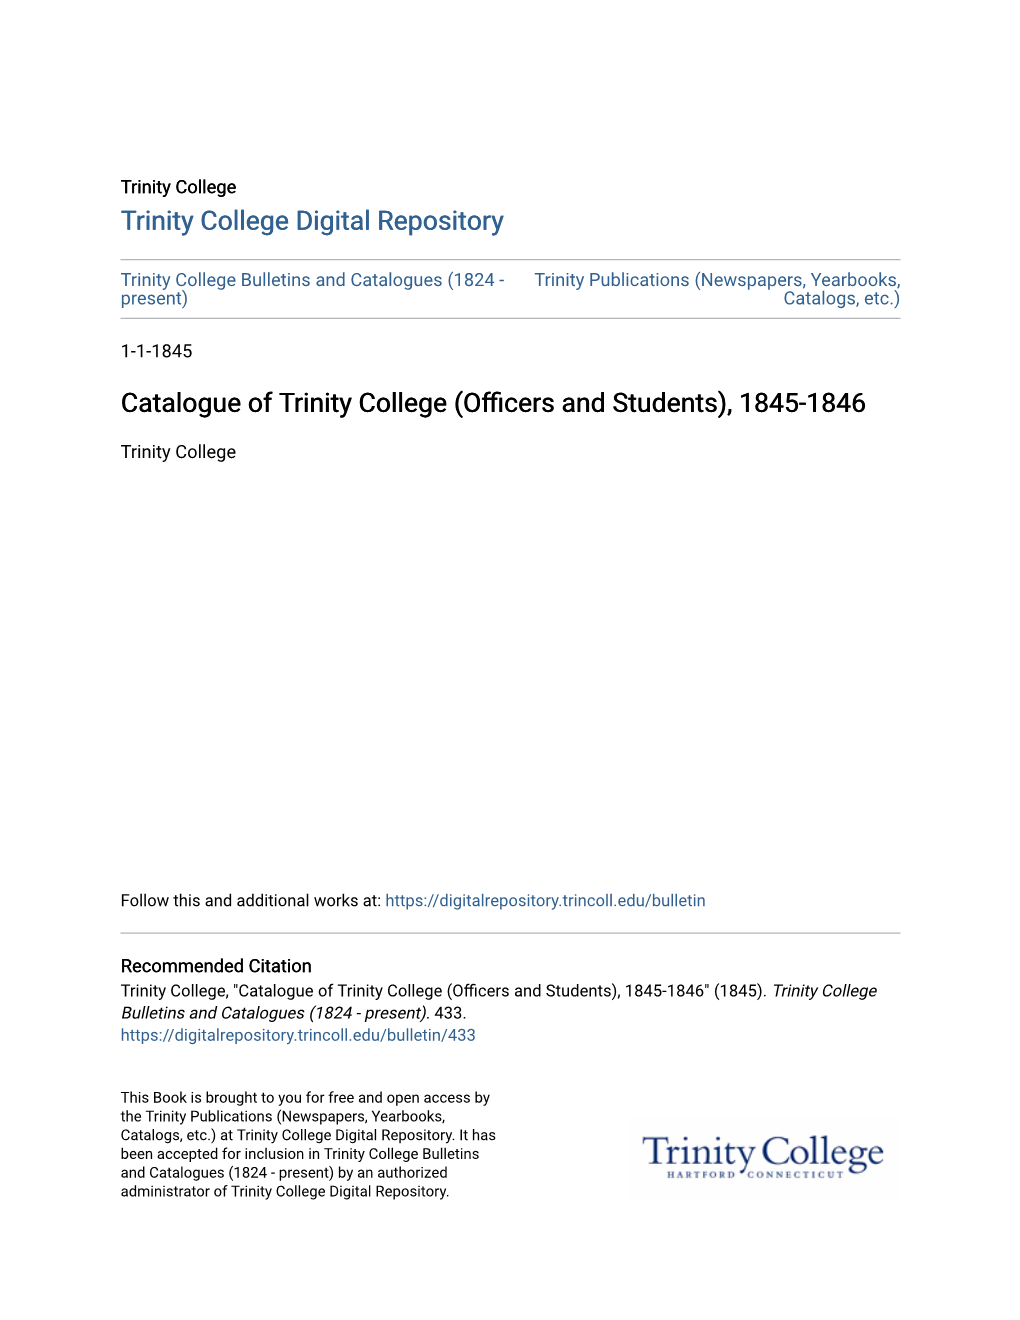 Catalogue of Trinity College (Officers and Students), 1845-1846